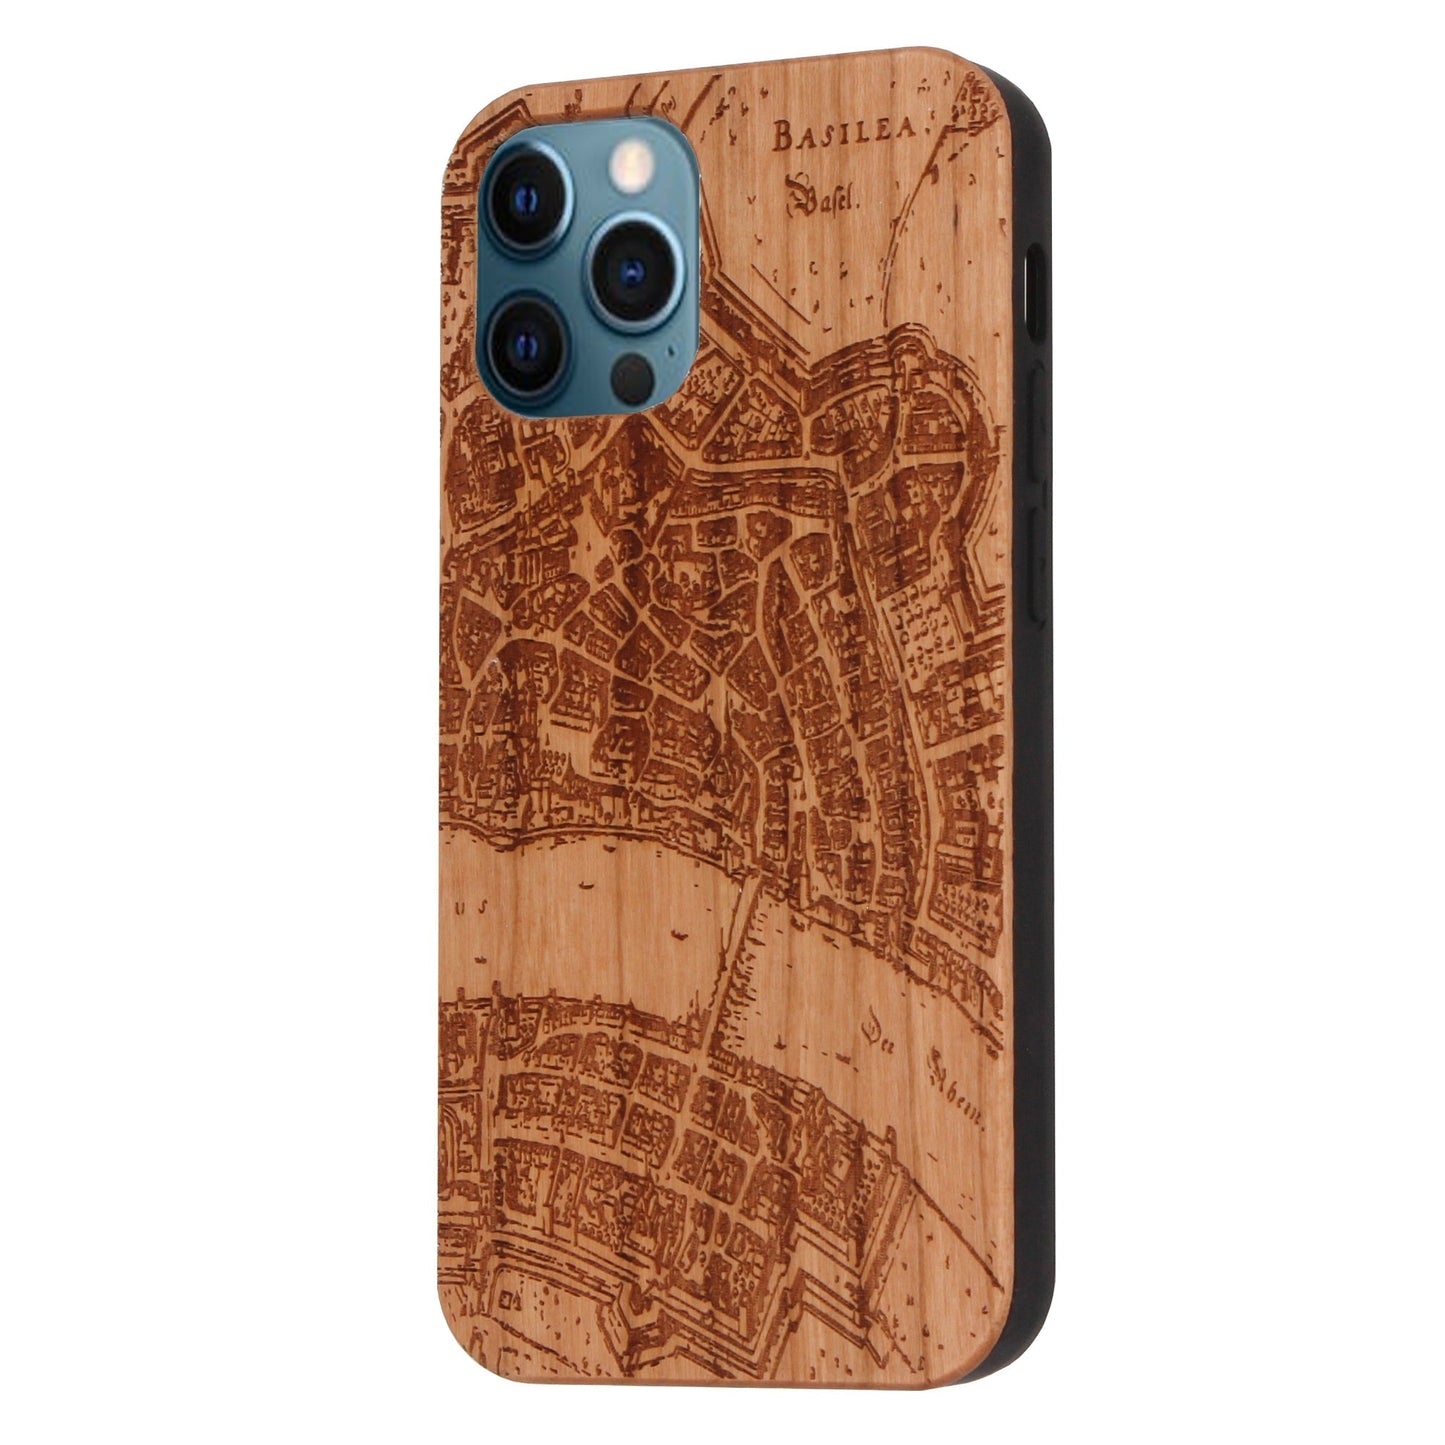 Basel Merian Eden case made of cherry wood for iPhone 12/12 Pro